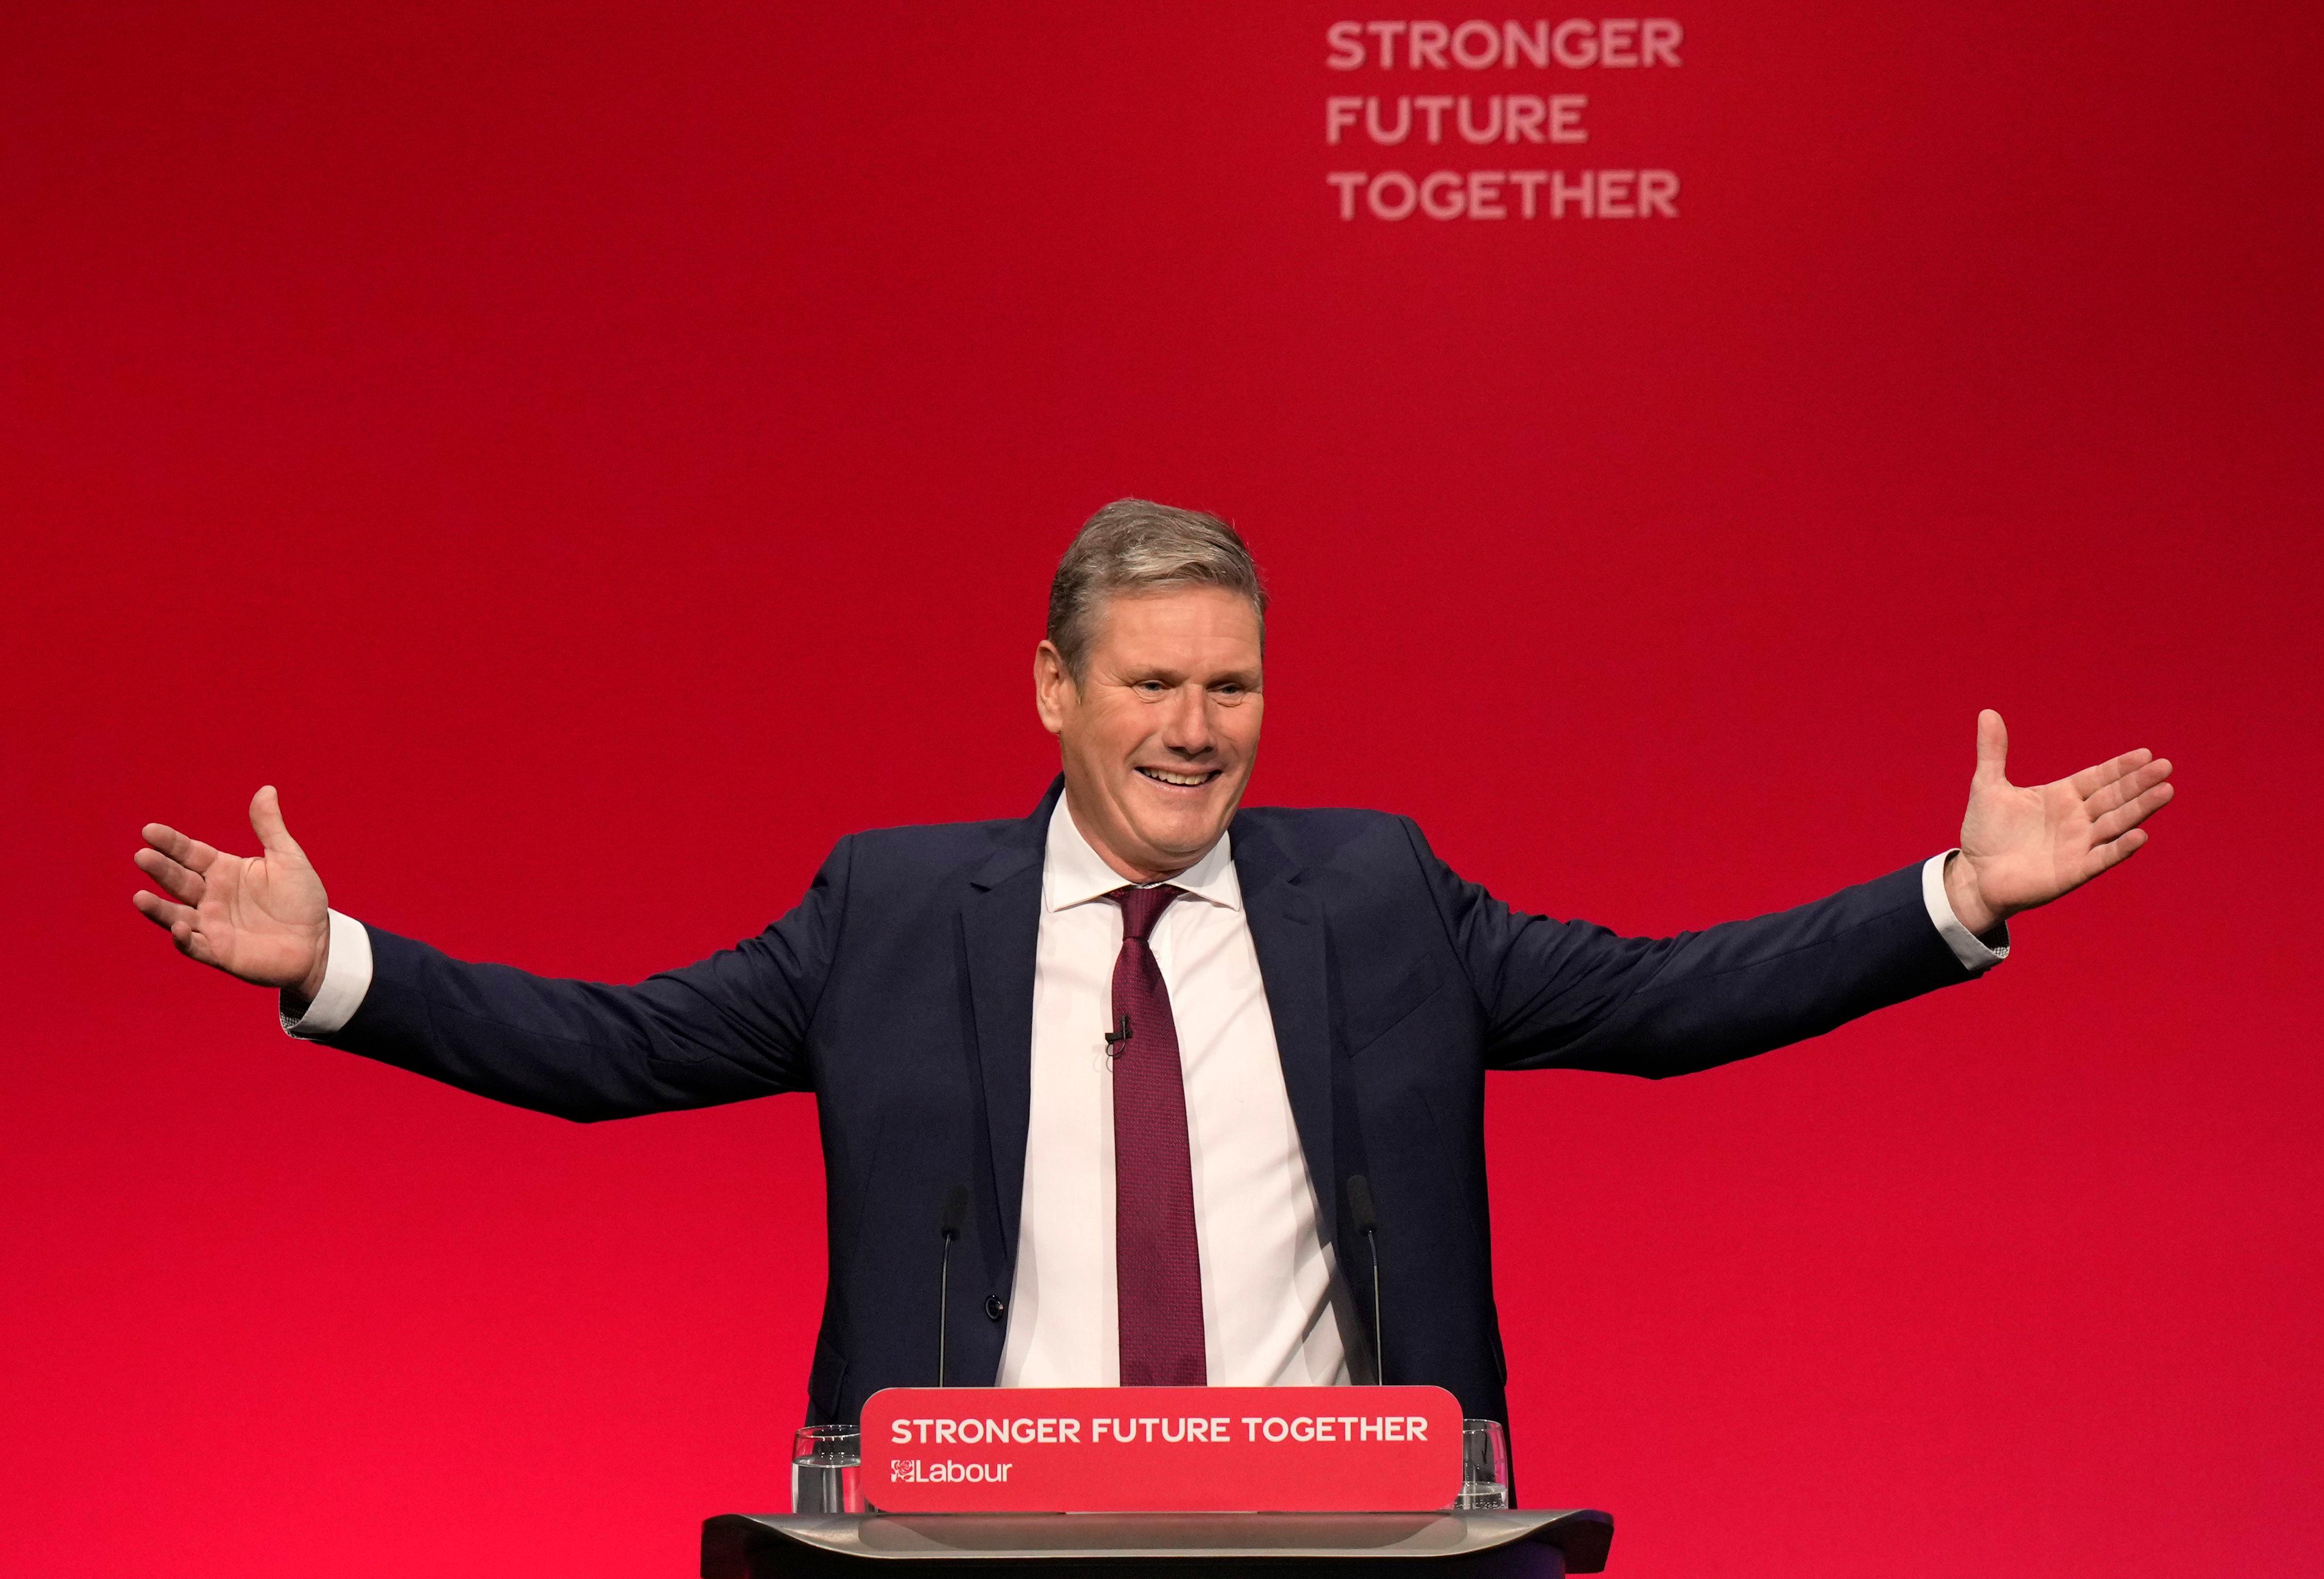 He's derided as dull, but Keir Starmer becomes UK prime minister with a sensational victory thumbnail